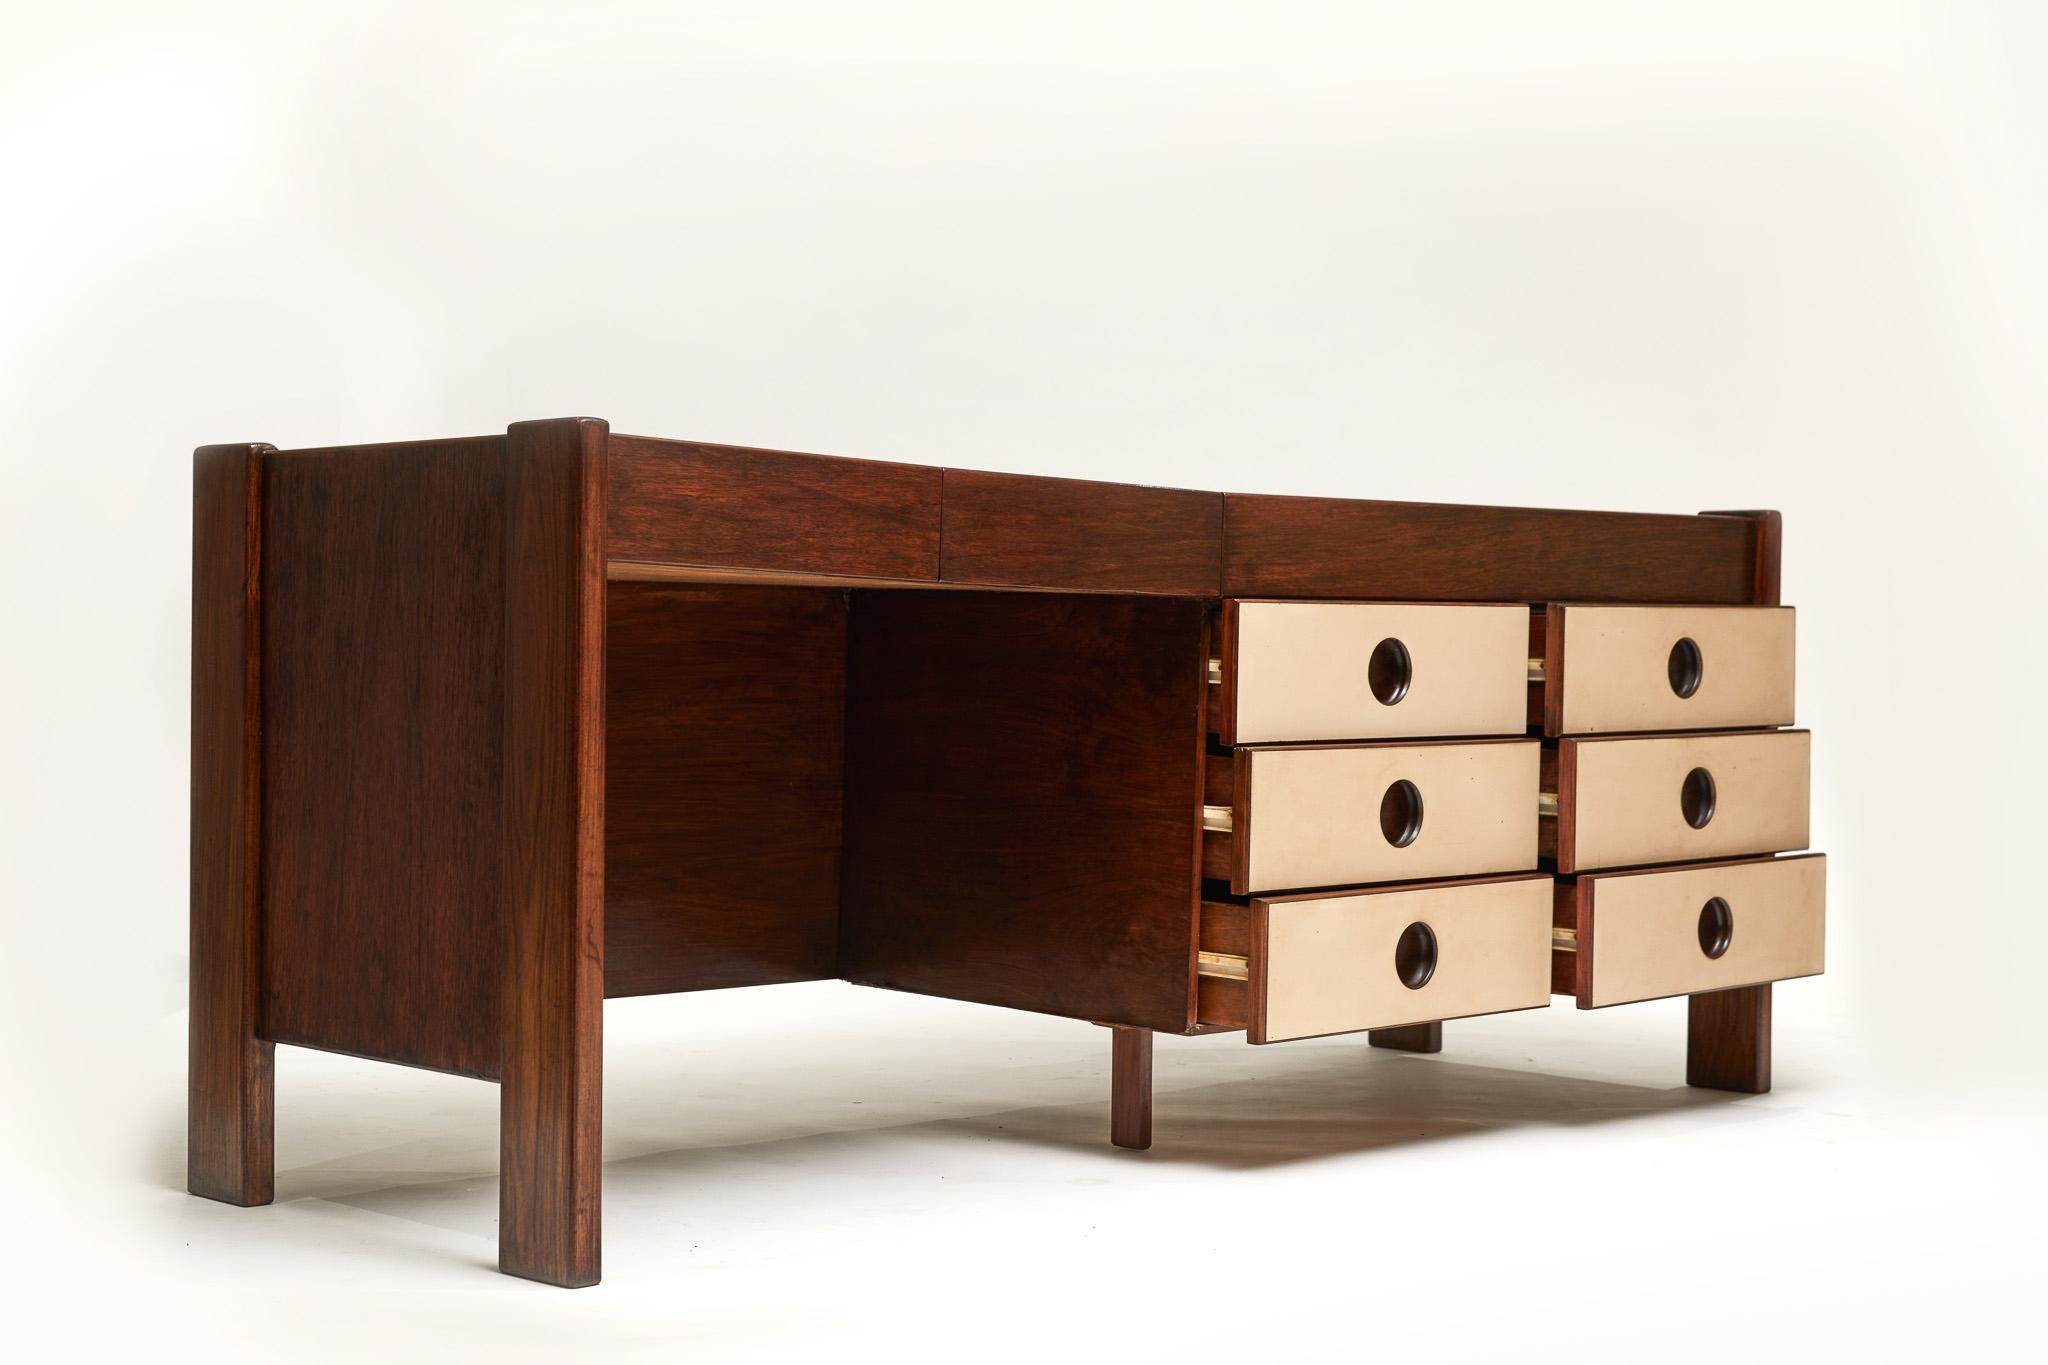 Midcentury Modern Desk in Hardwood & White Top by Jorge Zalszupin, 1970 In Good Condition For Sale In New York, NY